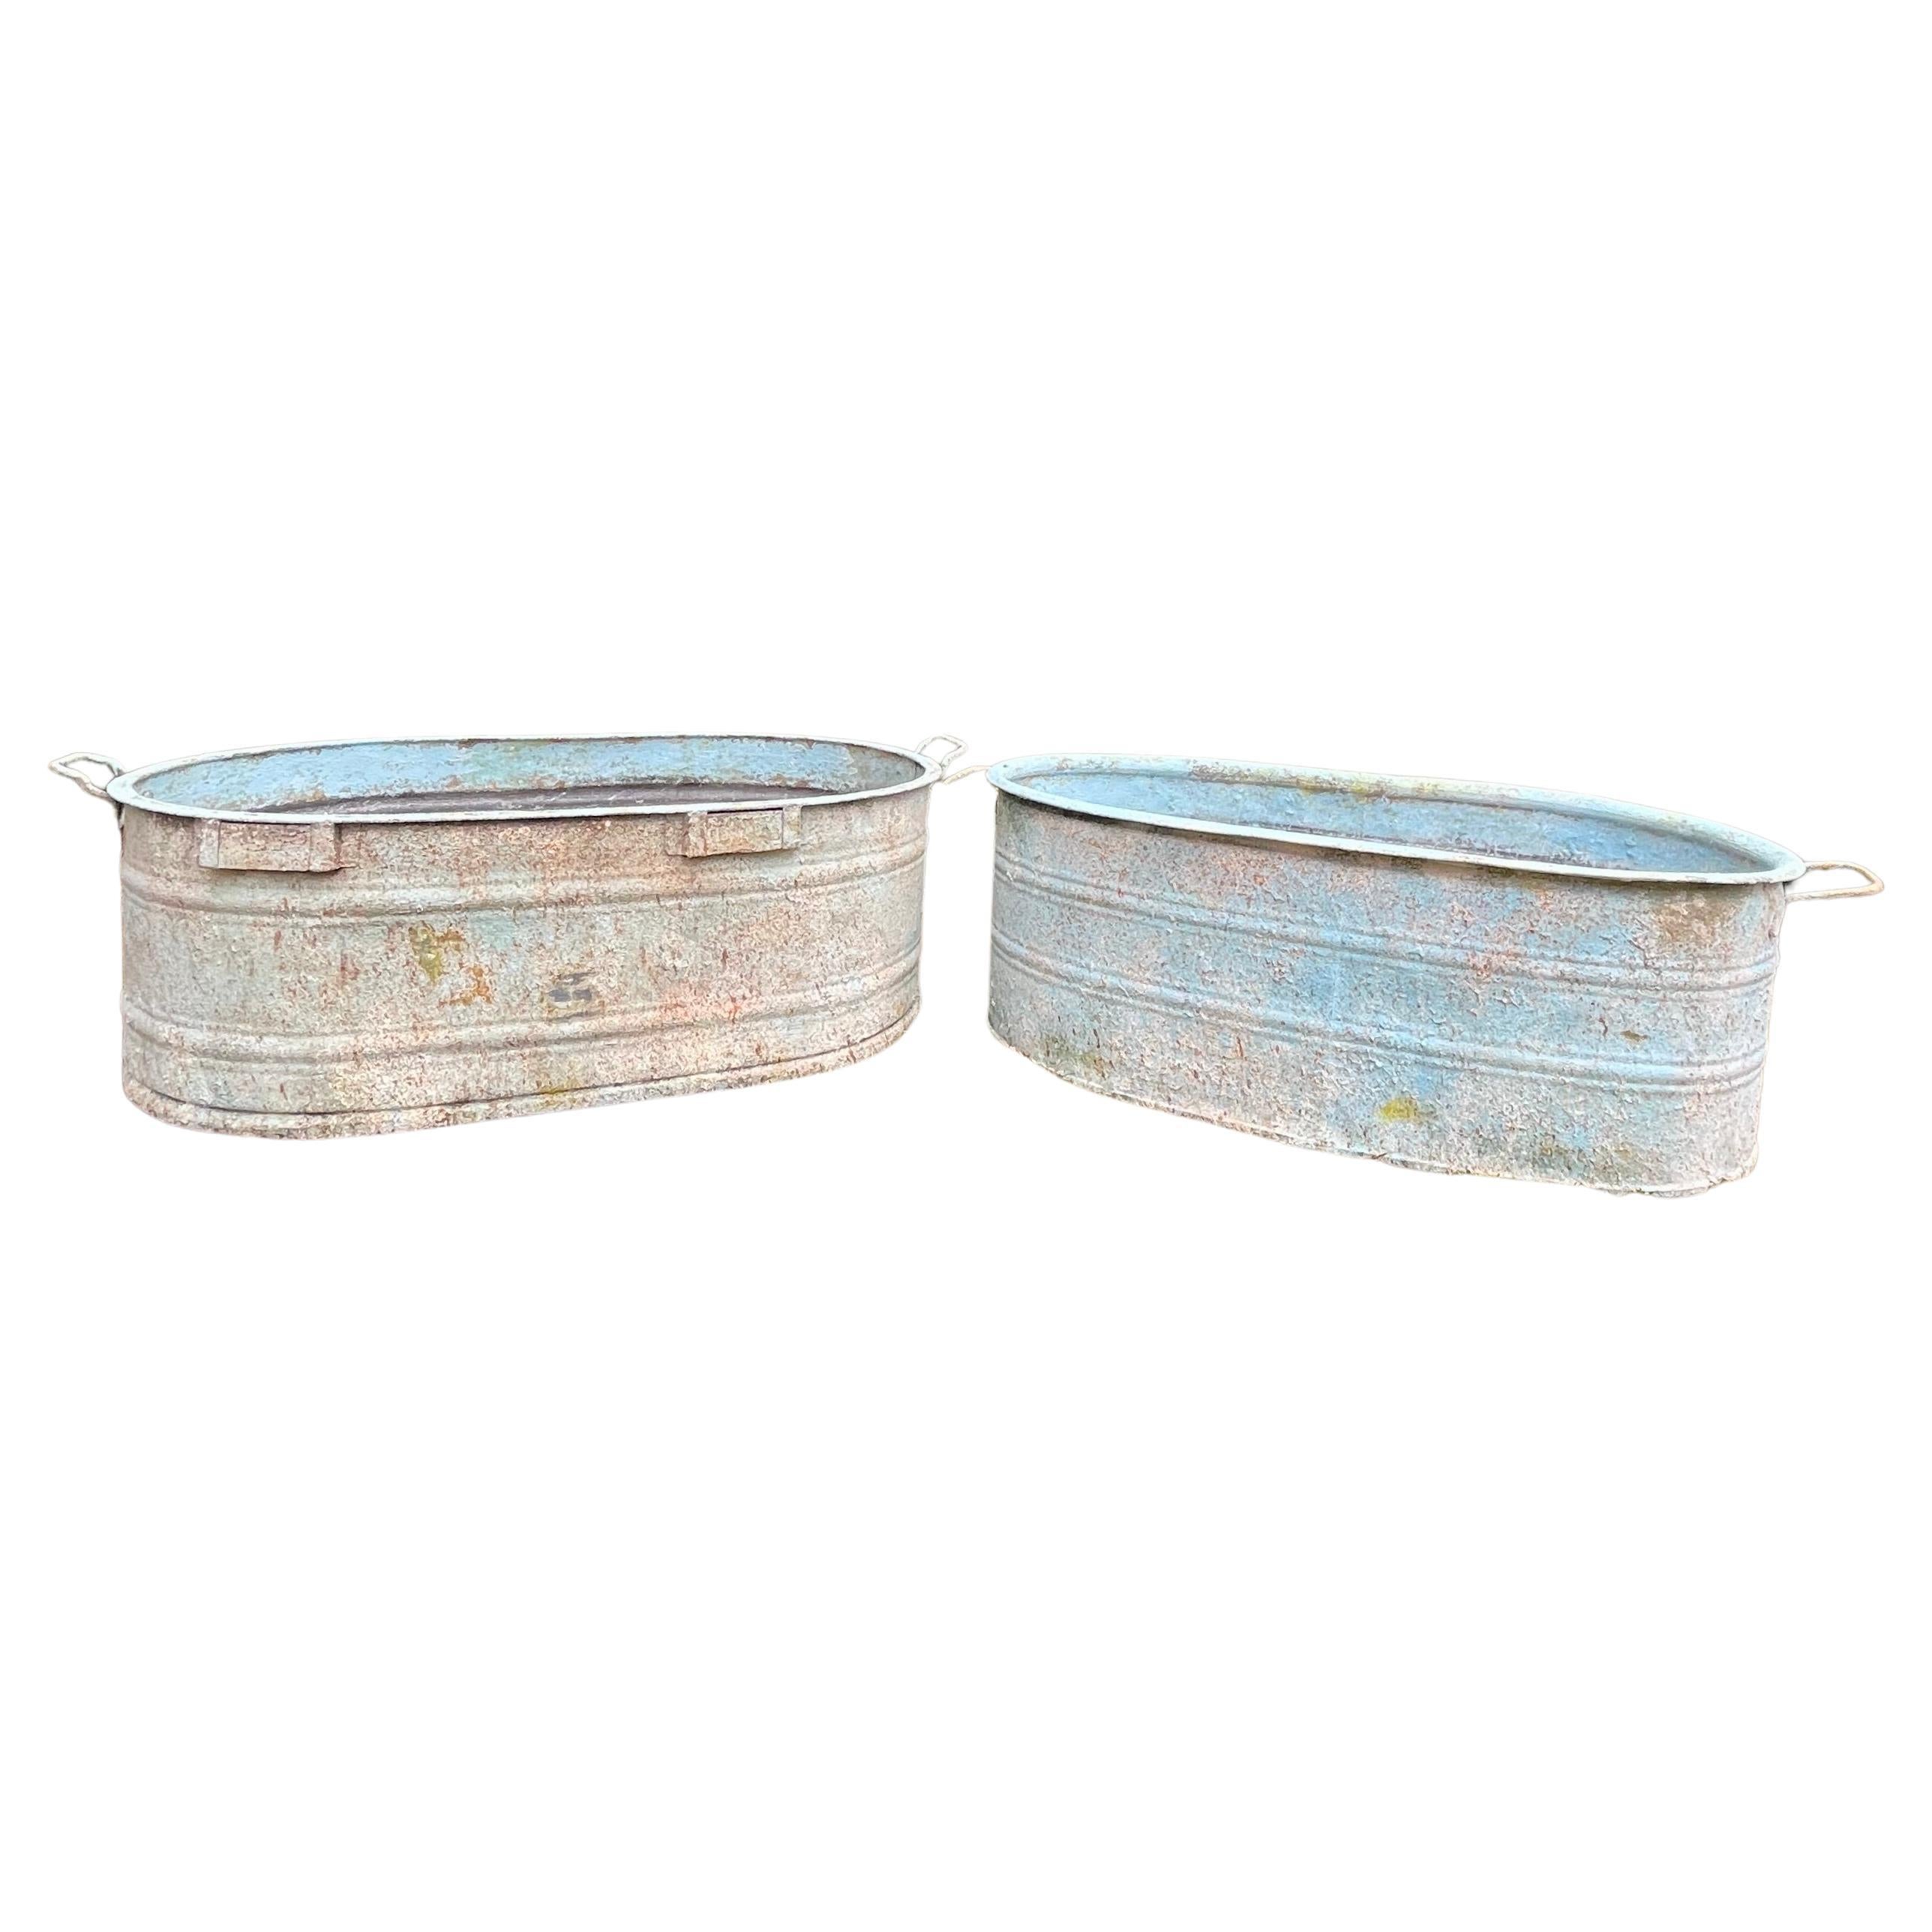 https://a.1stdibscdn.com/near-pair-of-very-large-german-oval-galvanized-planters-2-with-custom-surface-for-sale/f_8634/f_330969121677872146005/f_33096912_1677872146714_bg_processed.jpg